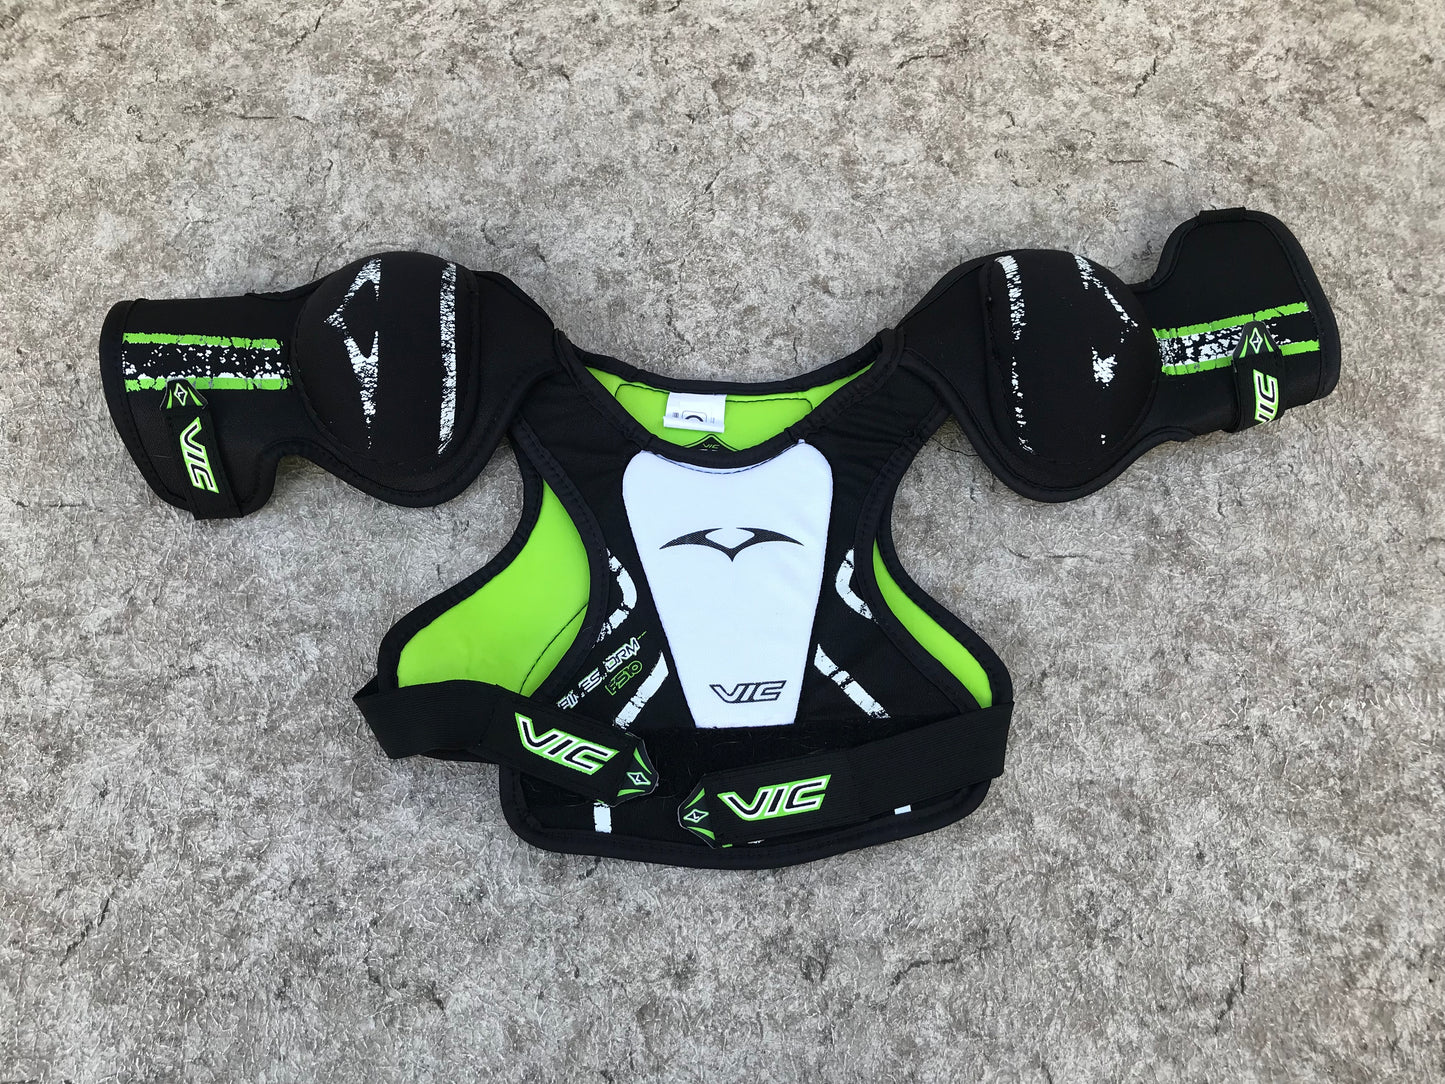 Hockey Shoulder Chest Pad Child Size Youth Large Vic Firestorm 5-6 Lime Black White